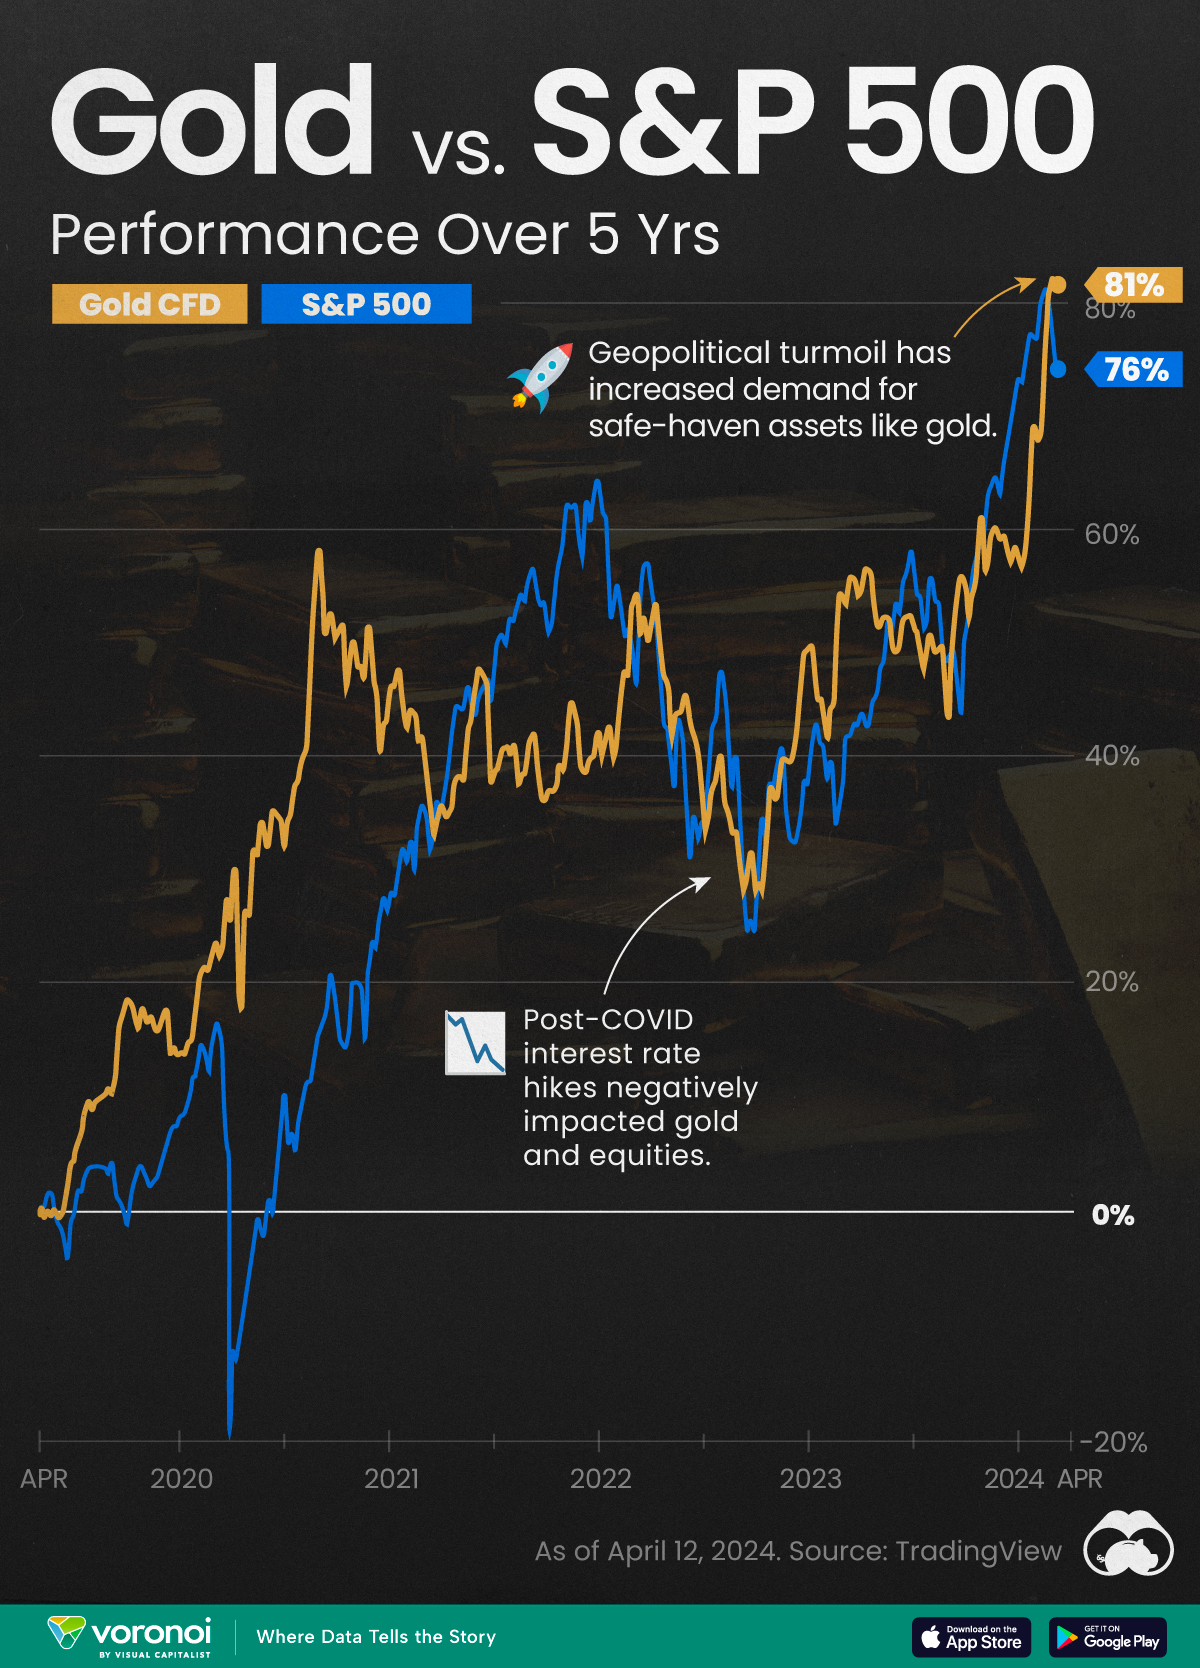 Chart showing the performance of gold vs S&P 500